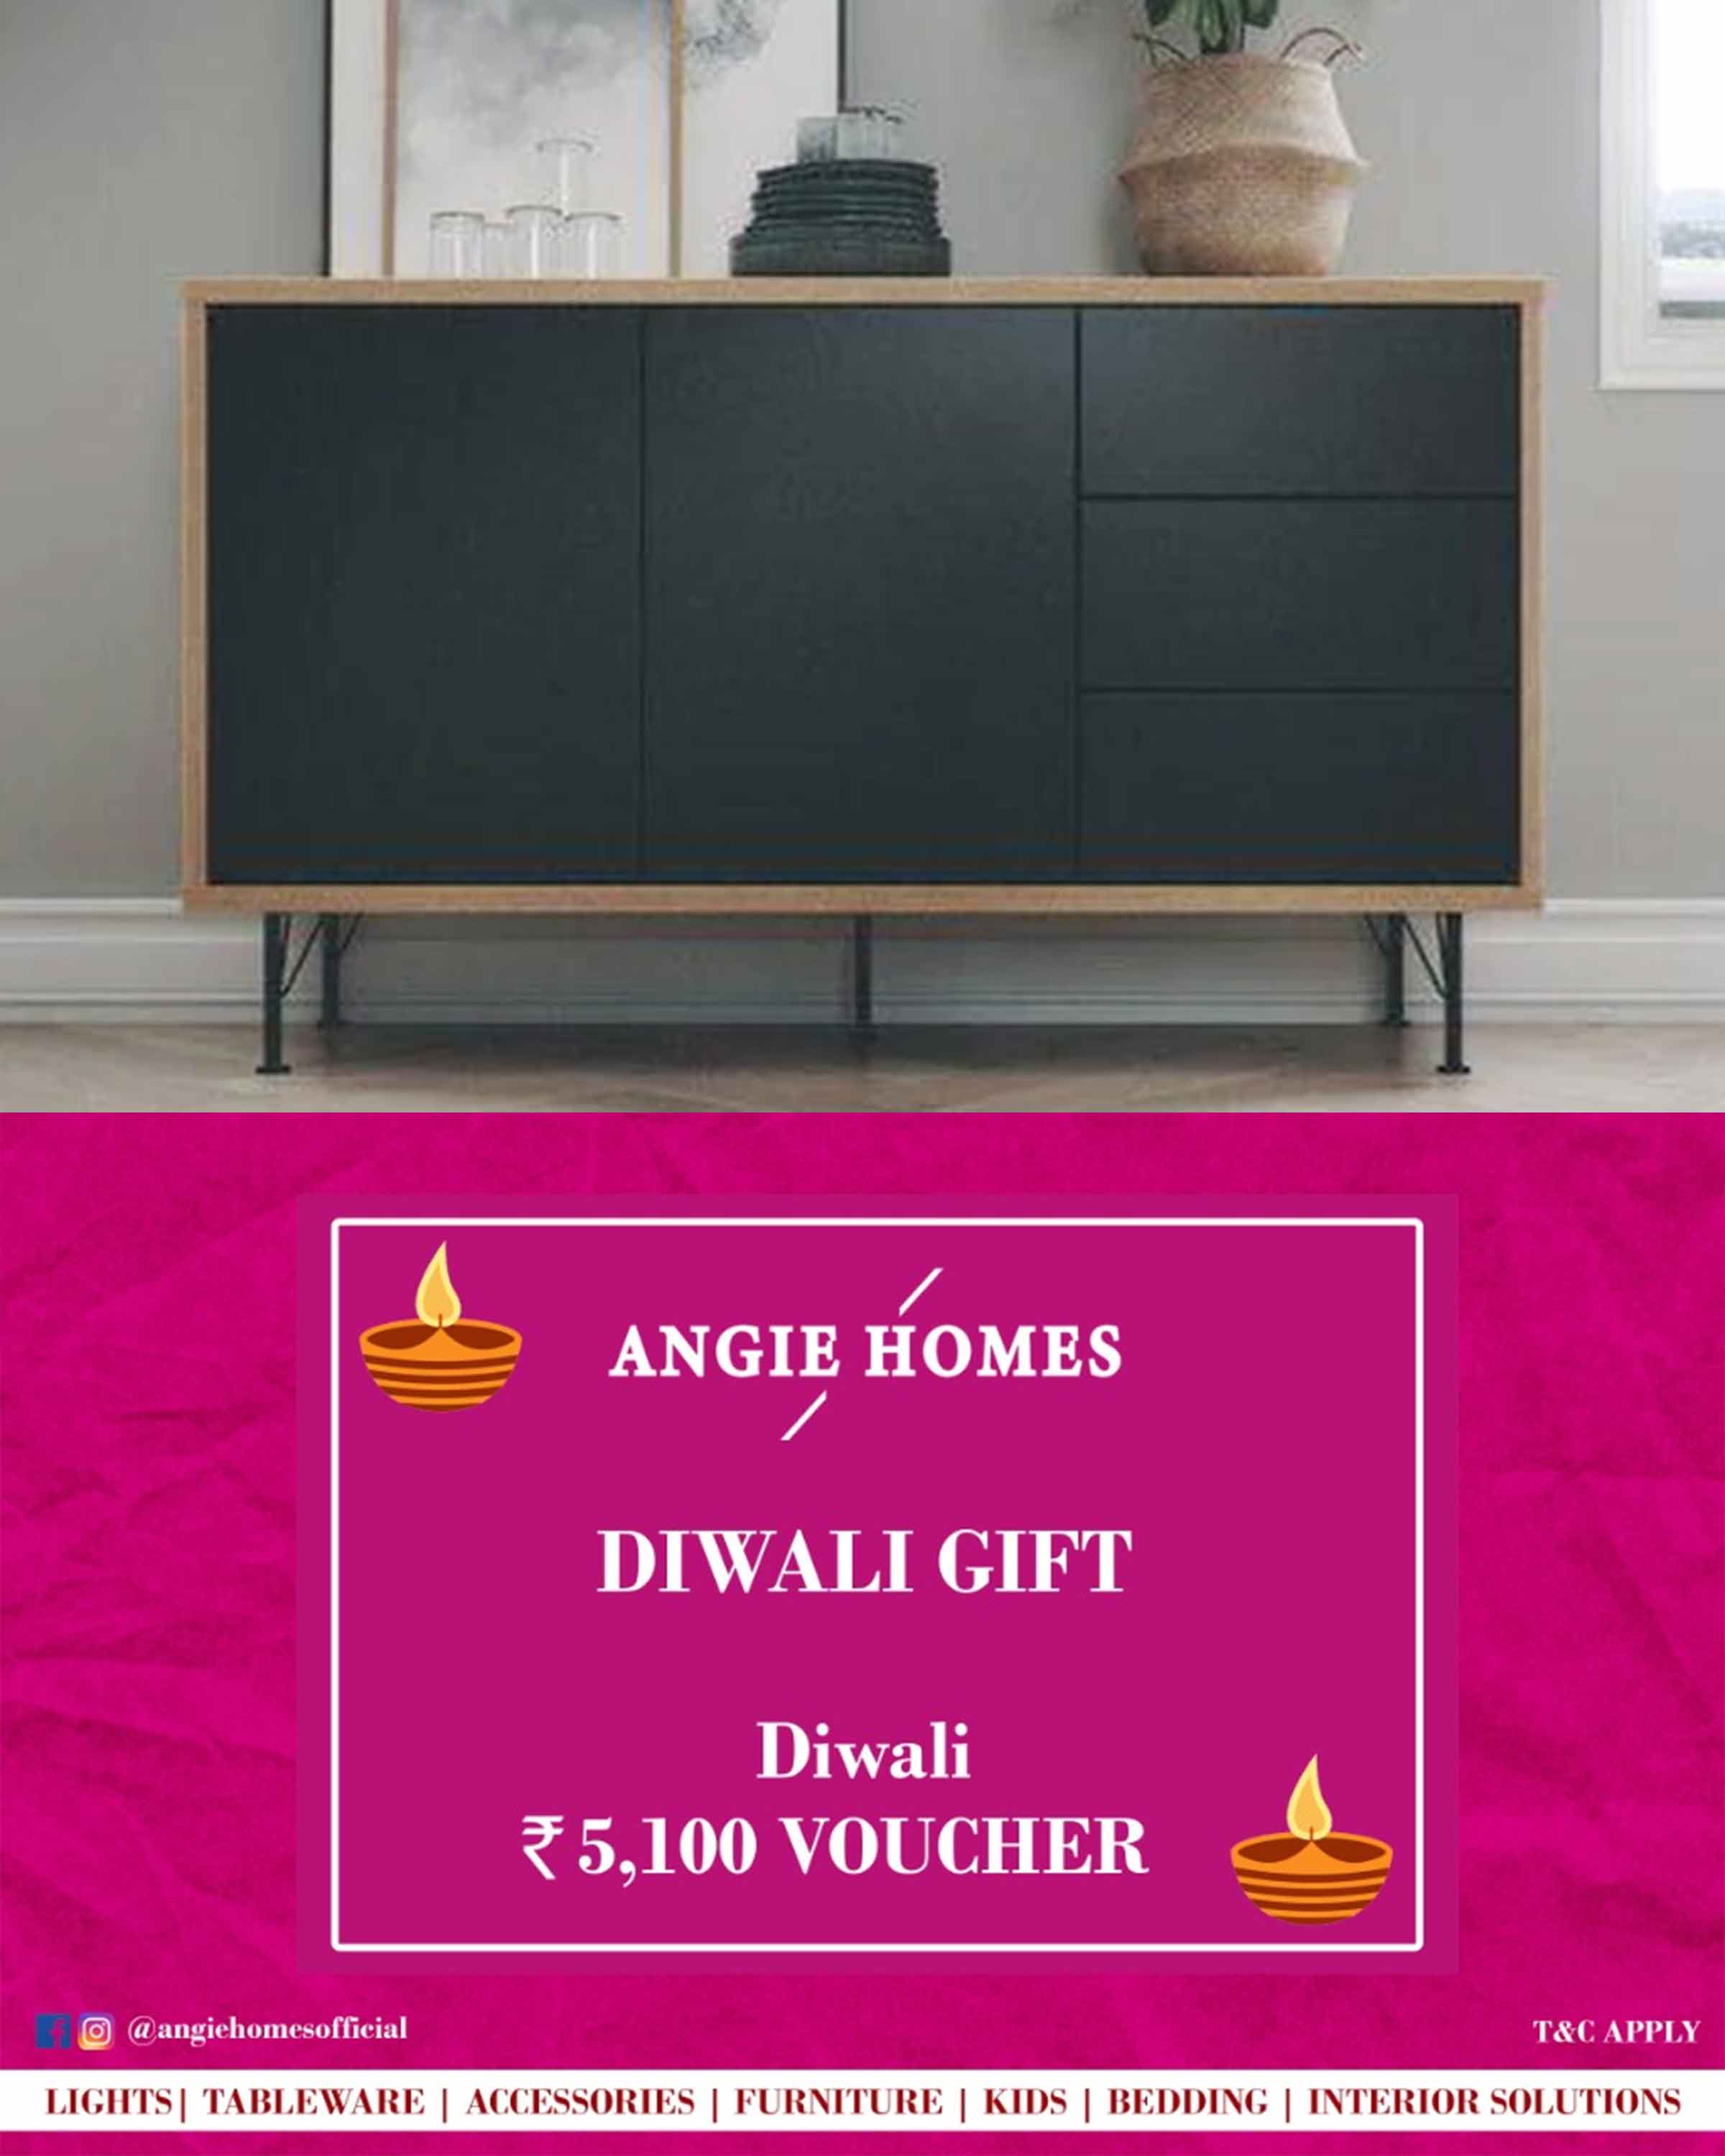 Online Diwali Gift Card Voucher for Rectangle Wooden Console | Furniture ANGIE HOMES